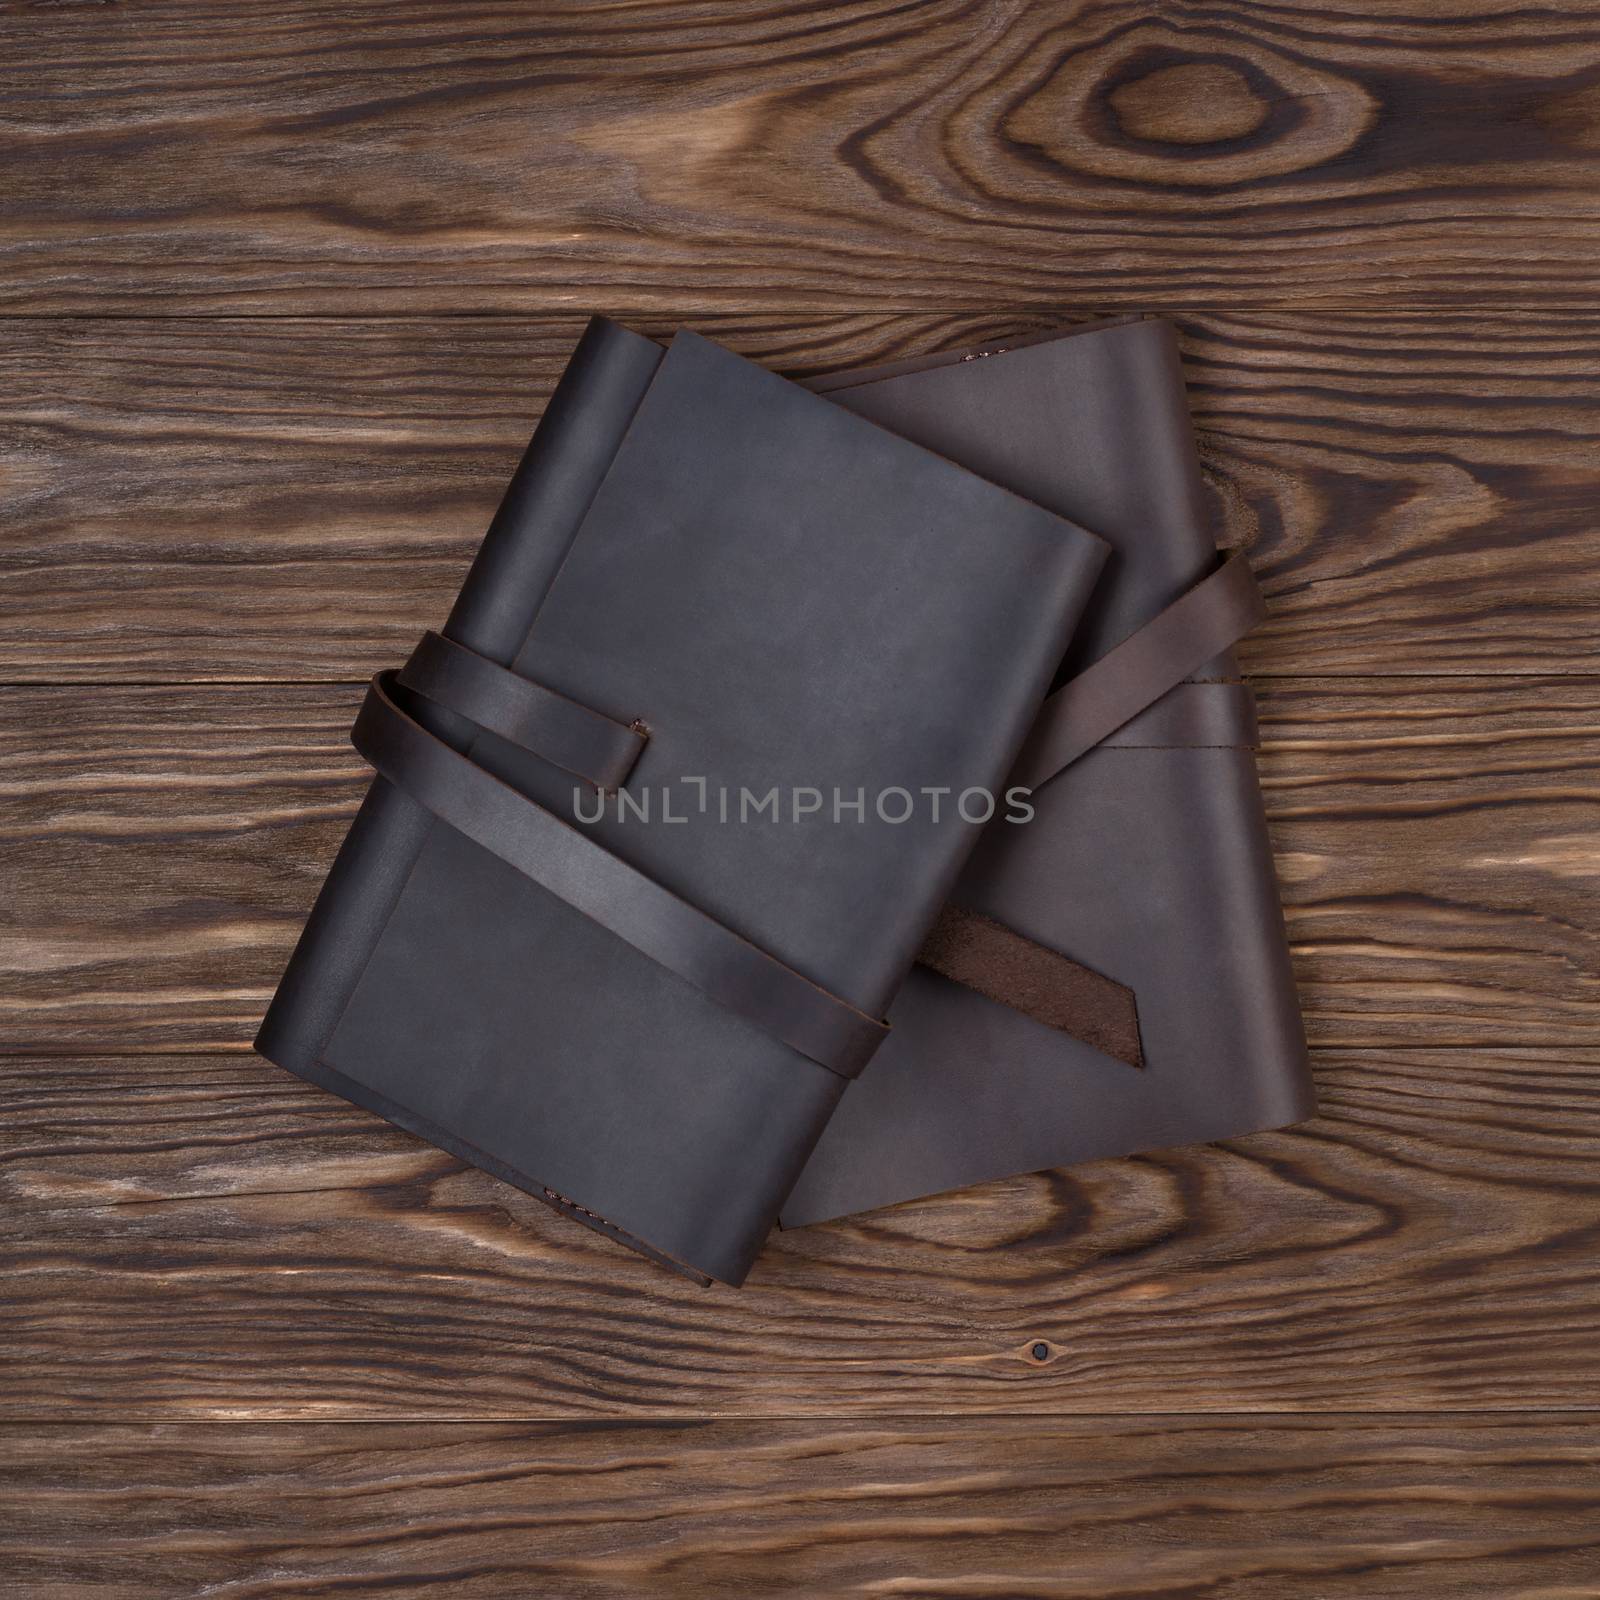 Black and brown handmade leather notebook covers on wooden background. Stock photo of luxury business accessories. Up to down view.